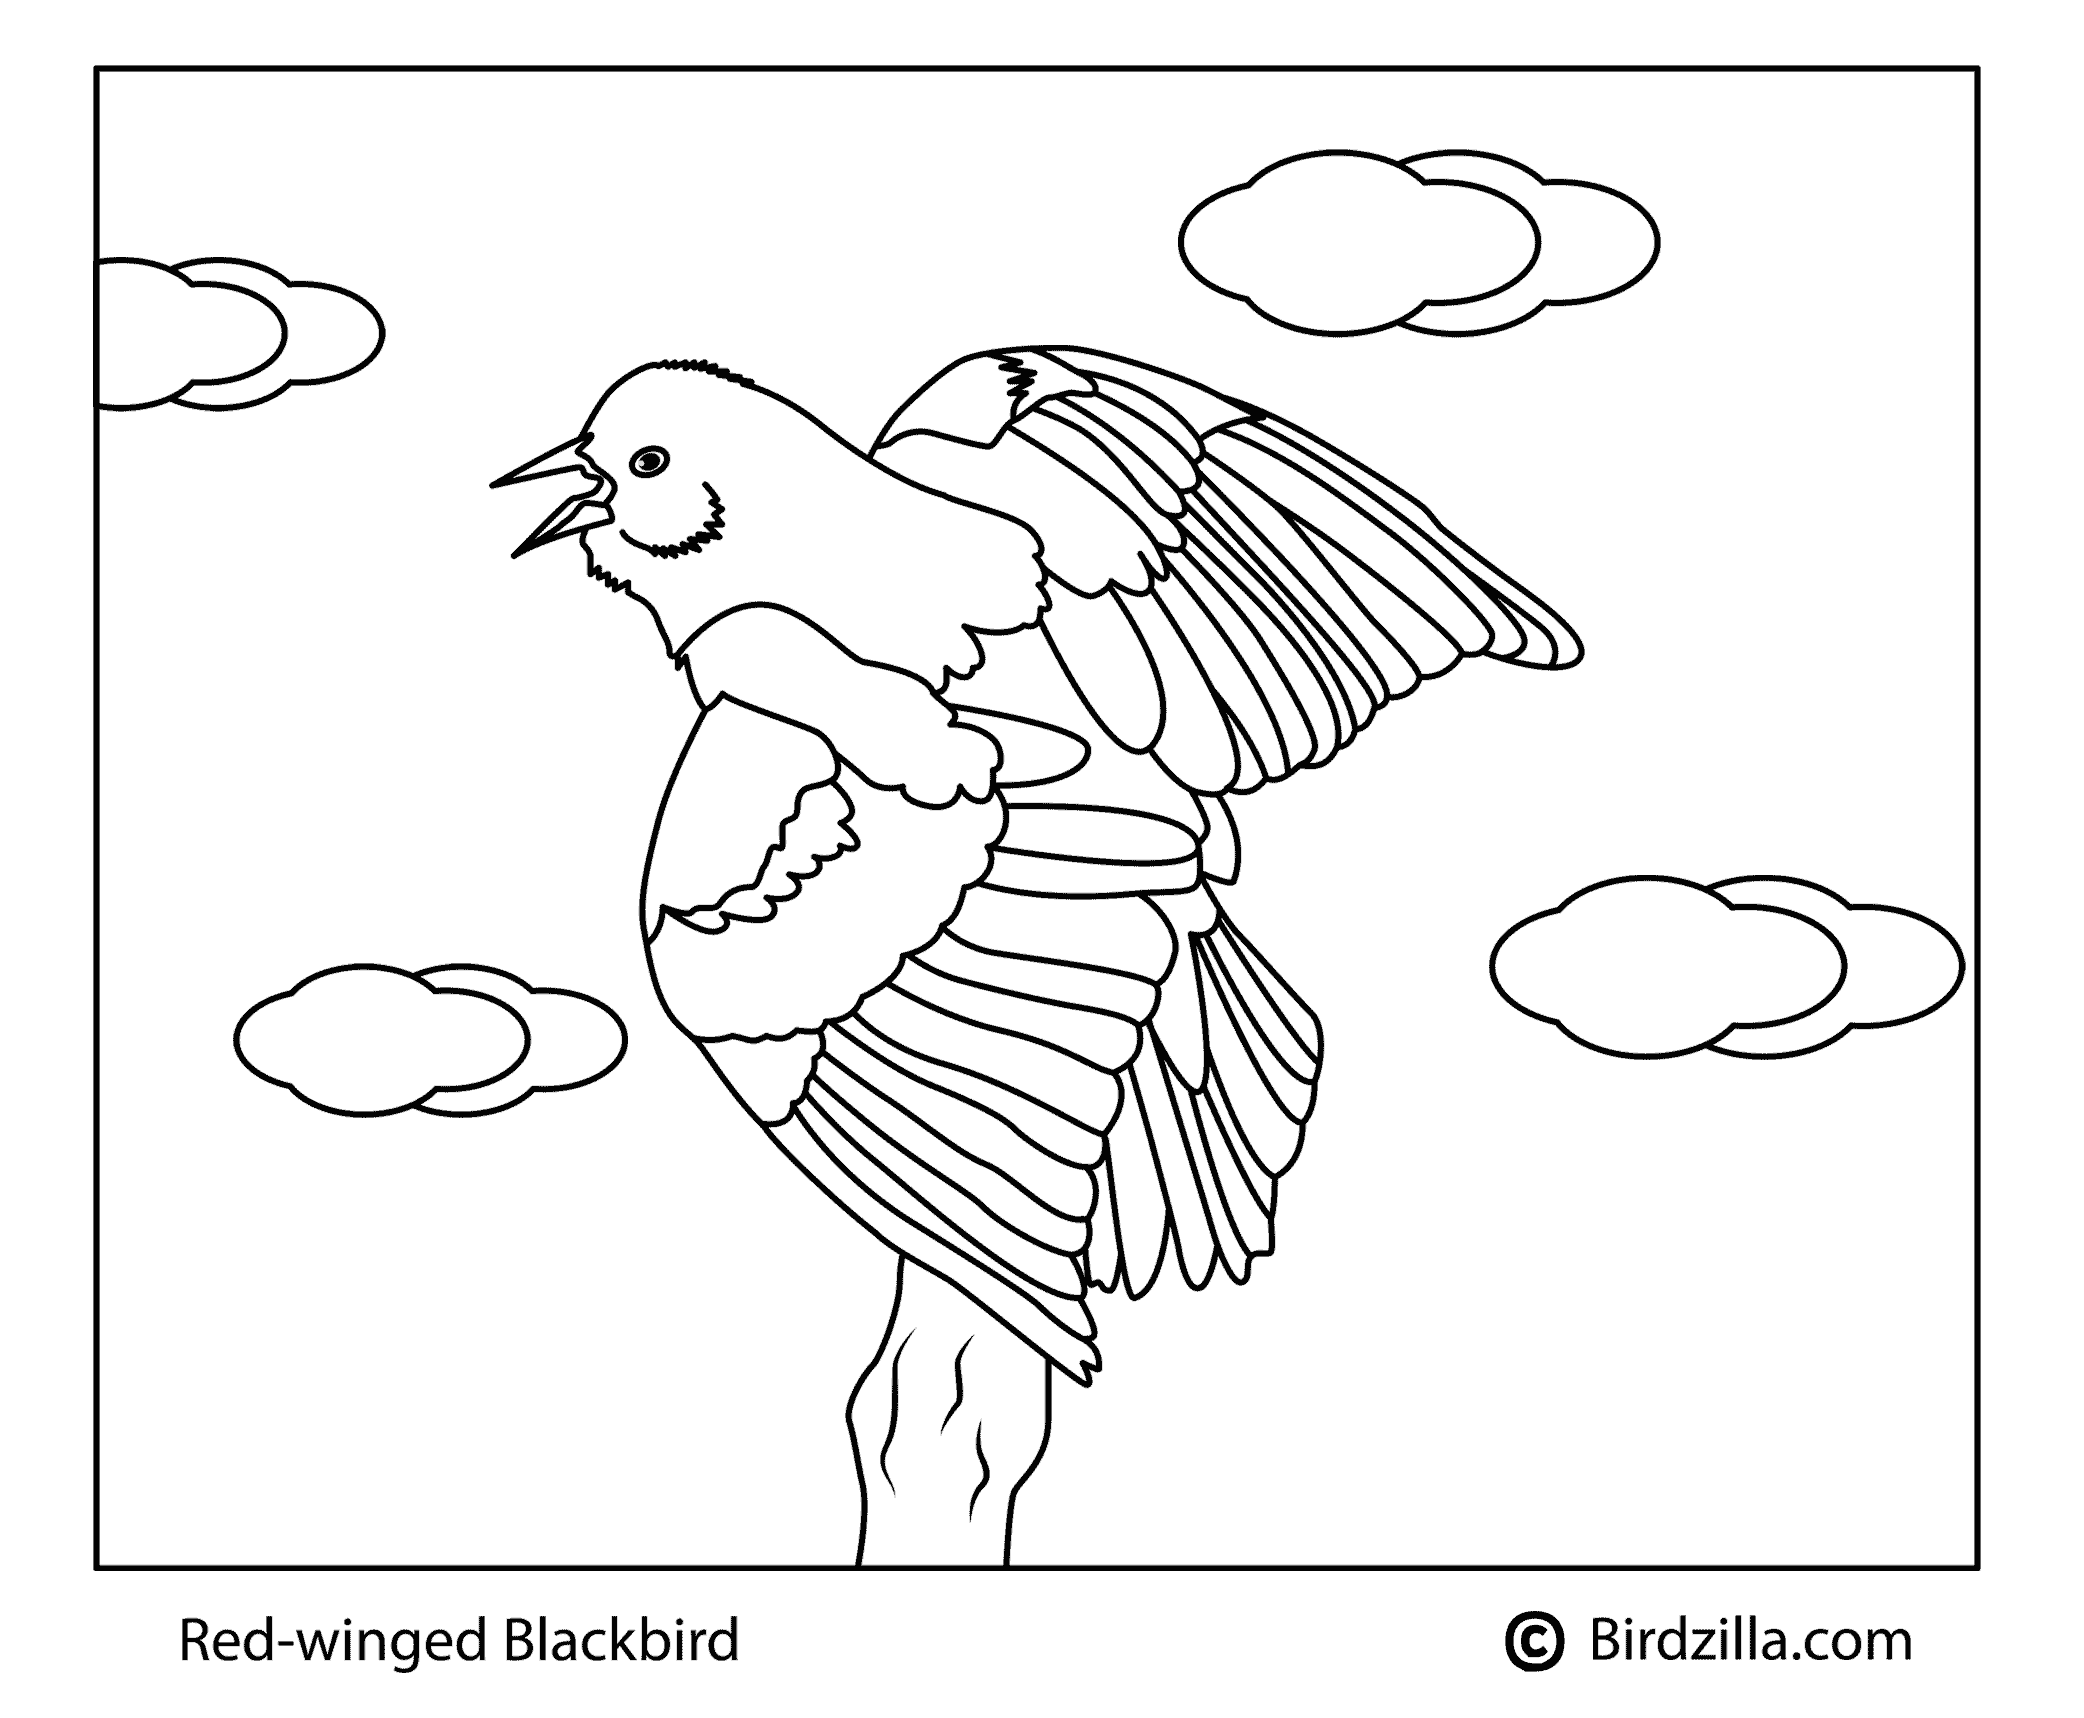 Red Winged Blackbird coloring page